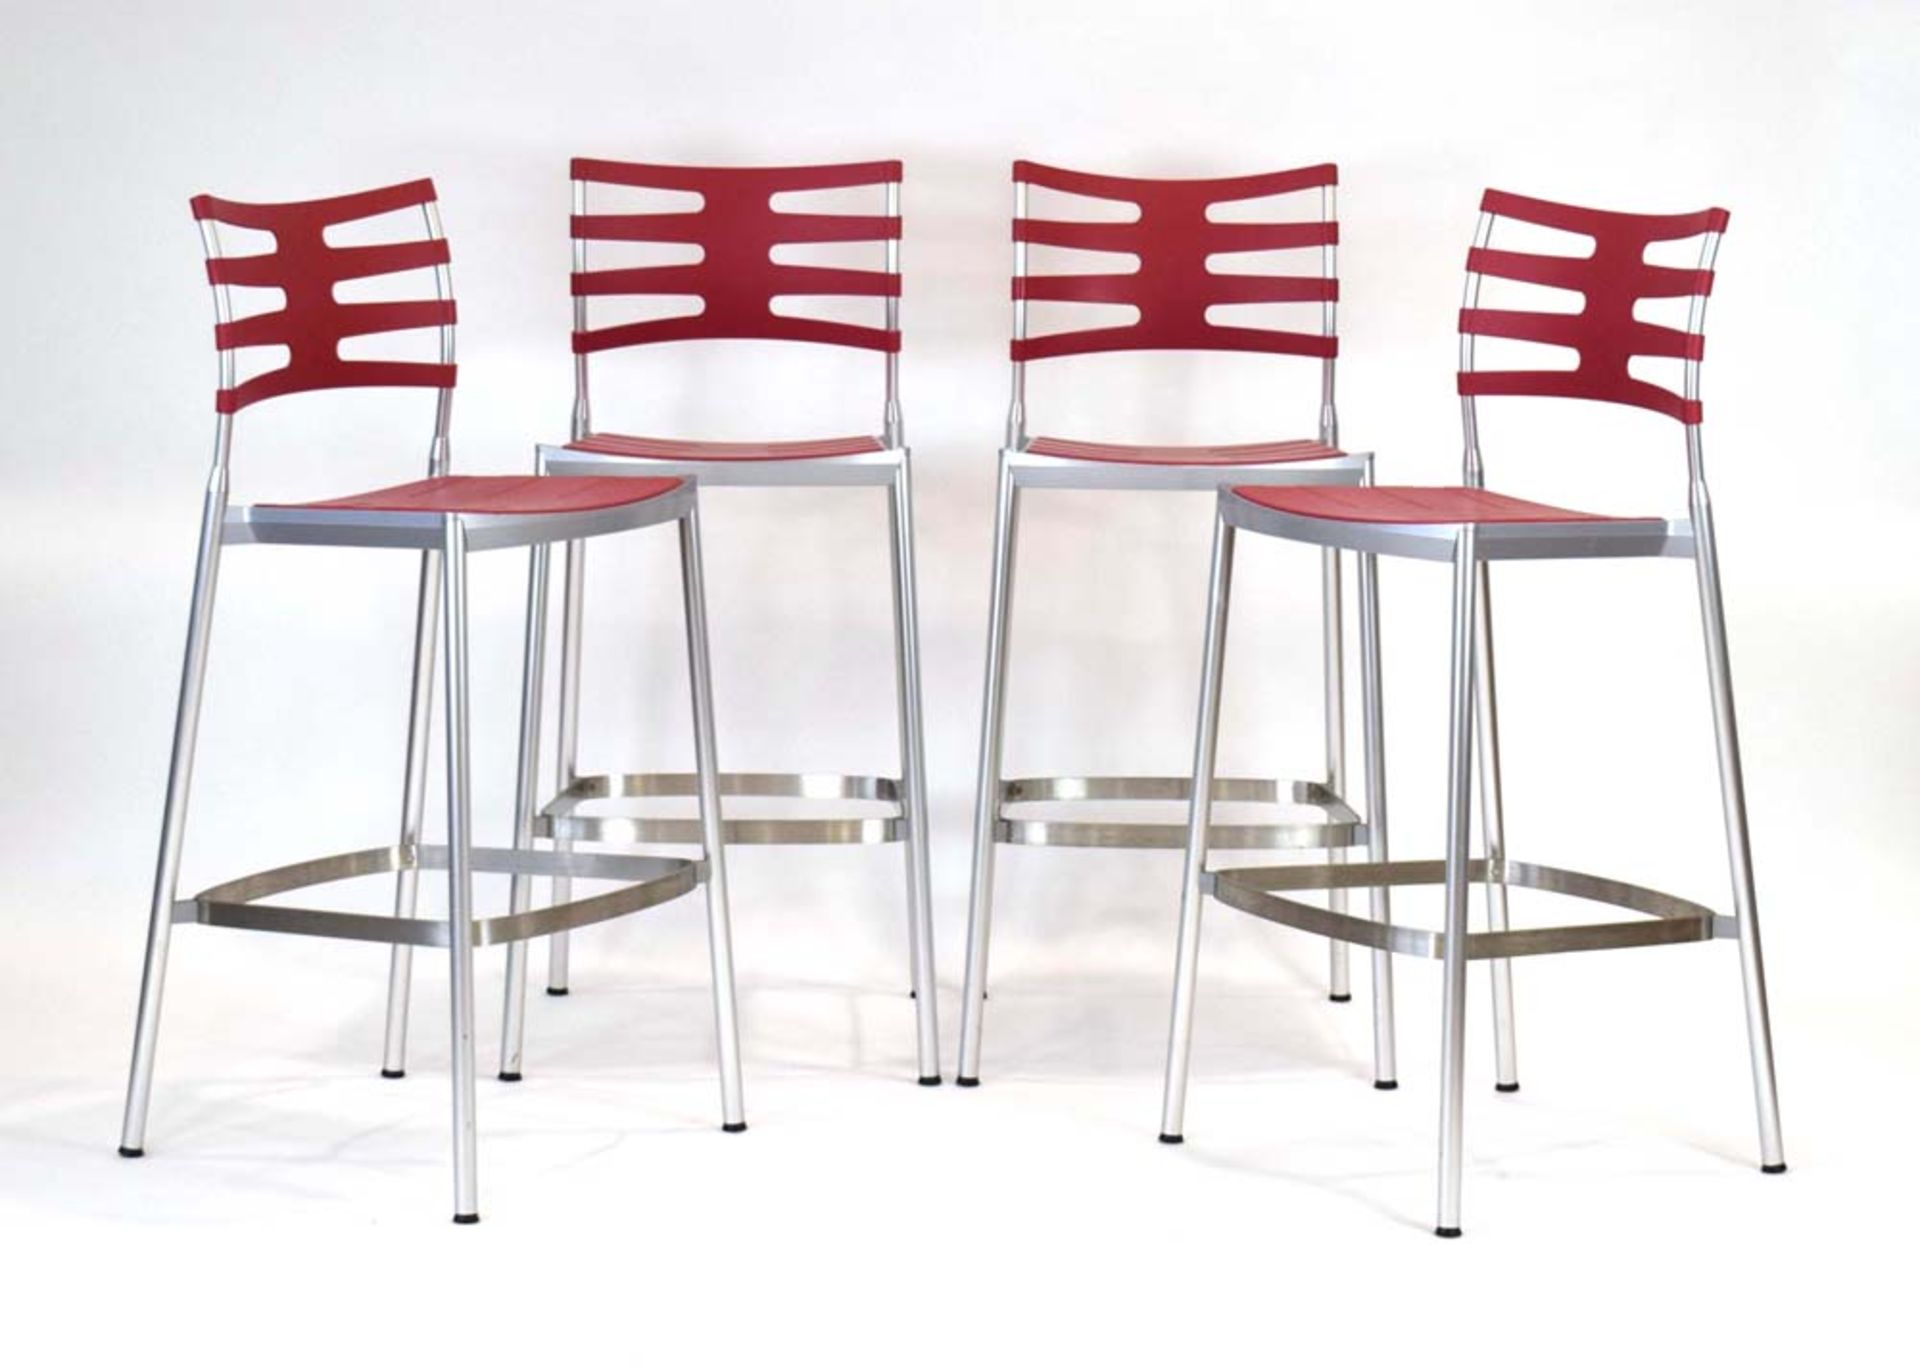 Kasper Salto for Fritz Hansen, a set of four 'Ice Bar Stools' with red seats and backs, - Image 2 of 2